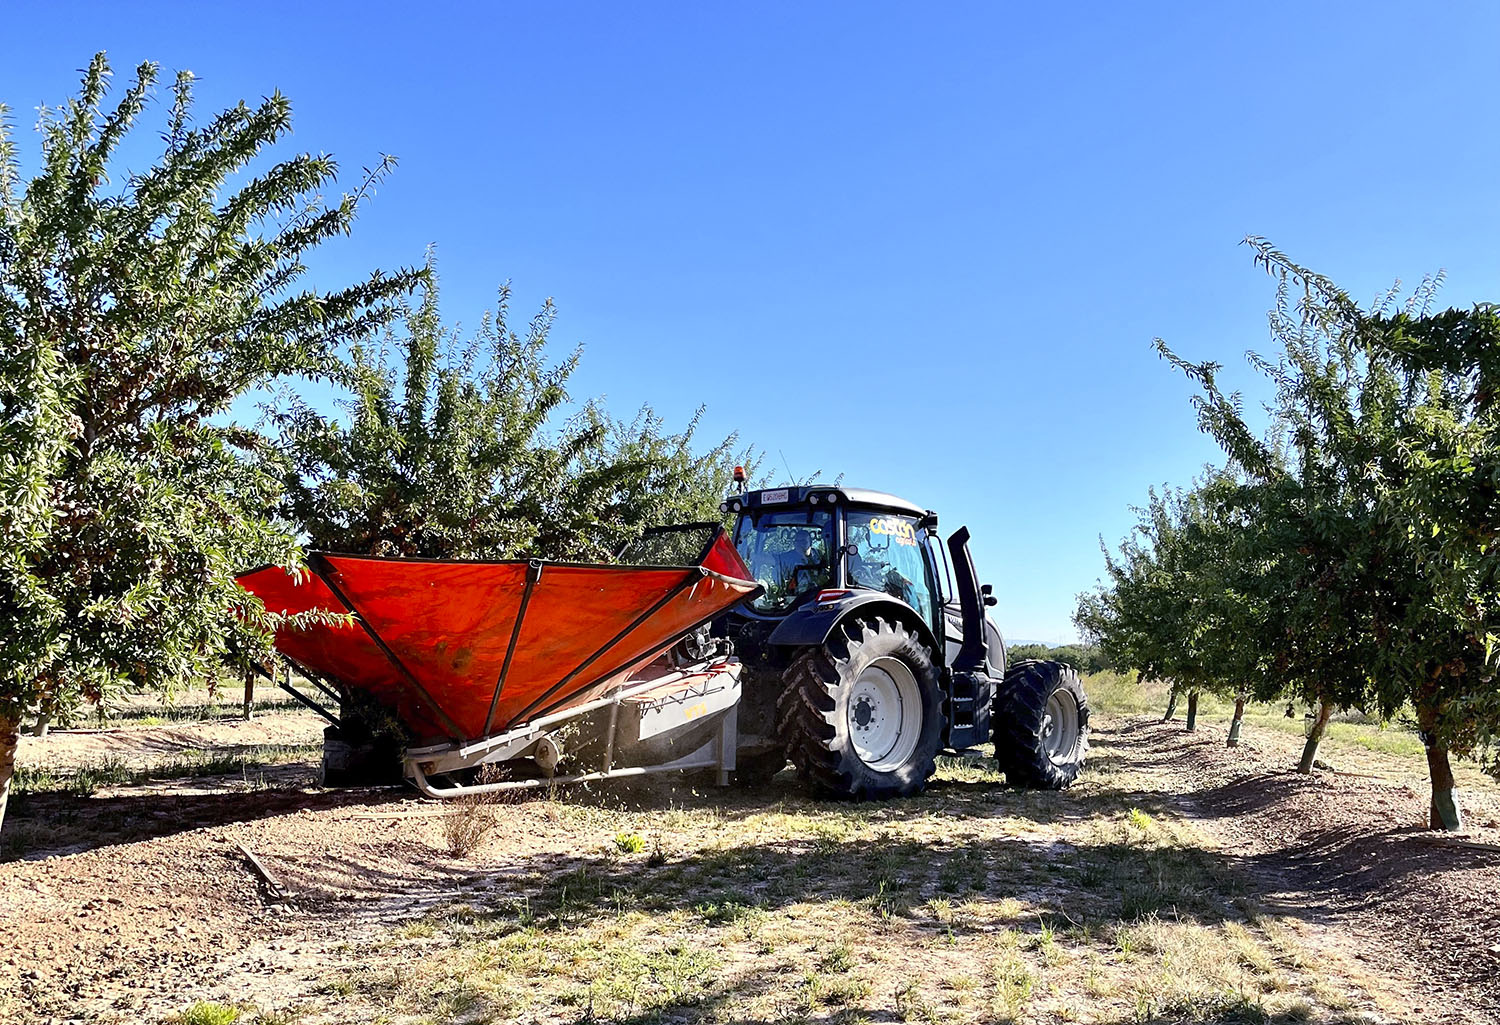 The Valtra N155 with the TwinTrac reverse drive system operated an umbrella harvester for almonds. The harvested almonds were unloaded onto a trailer.